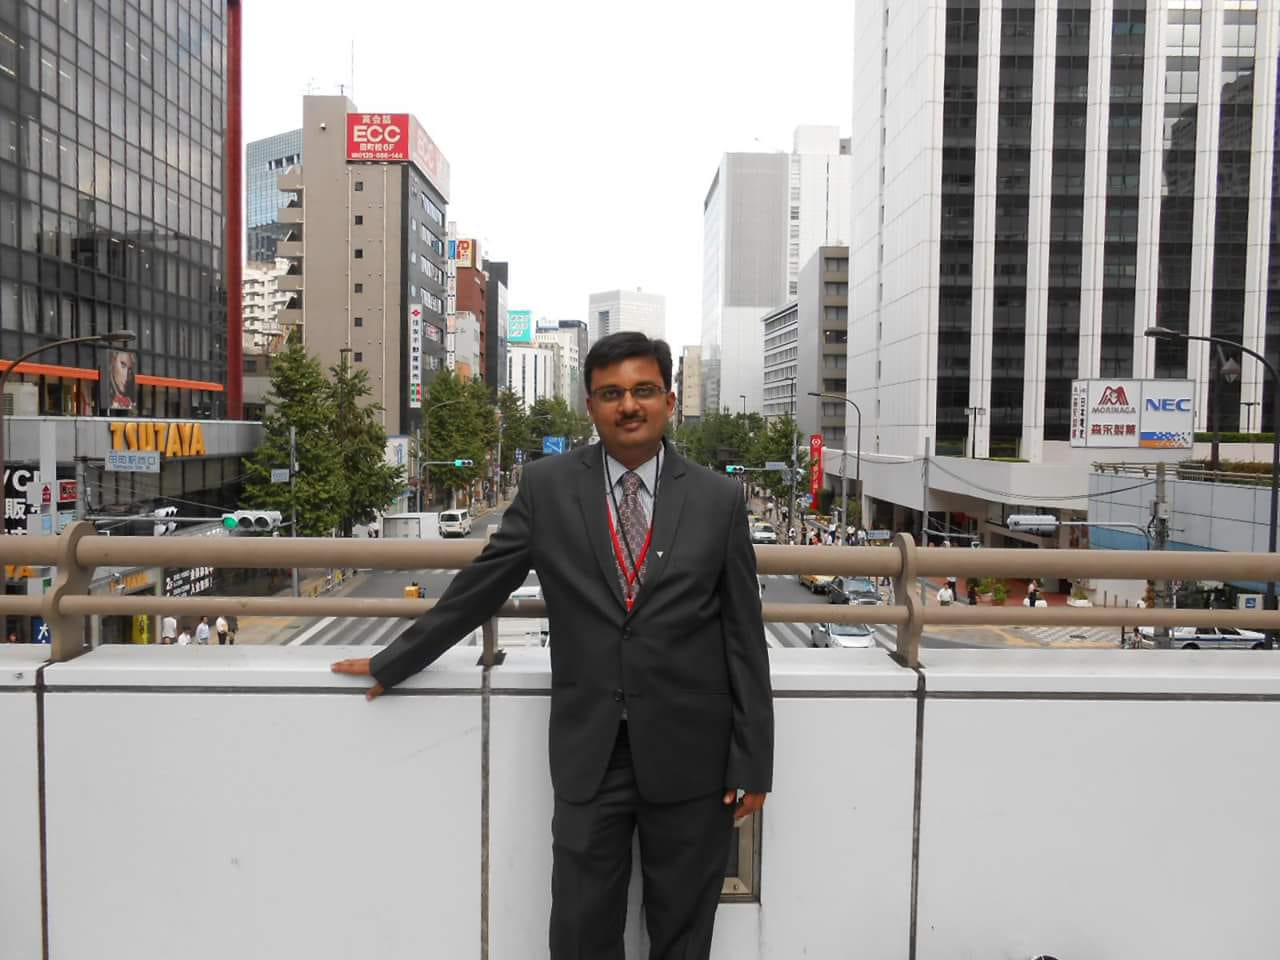 Hardik got idea of his start up of waste management and recycling during his Japan trip